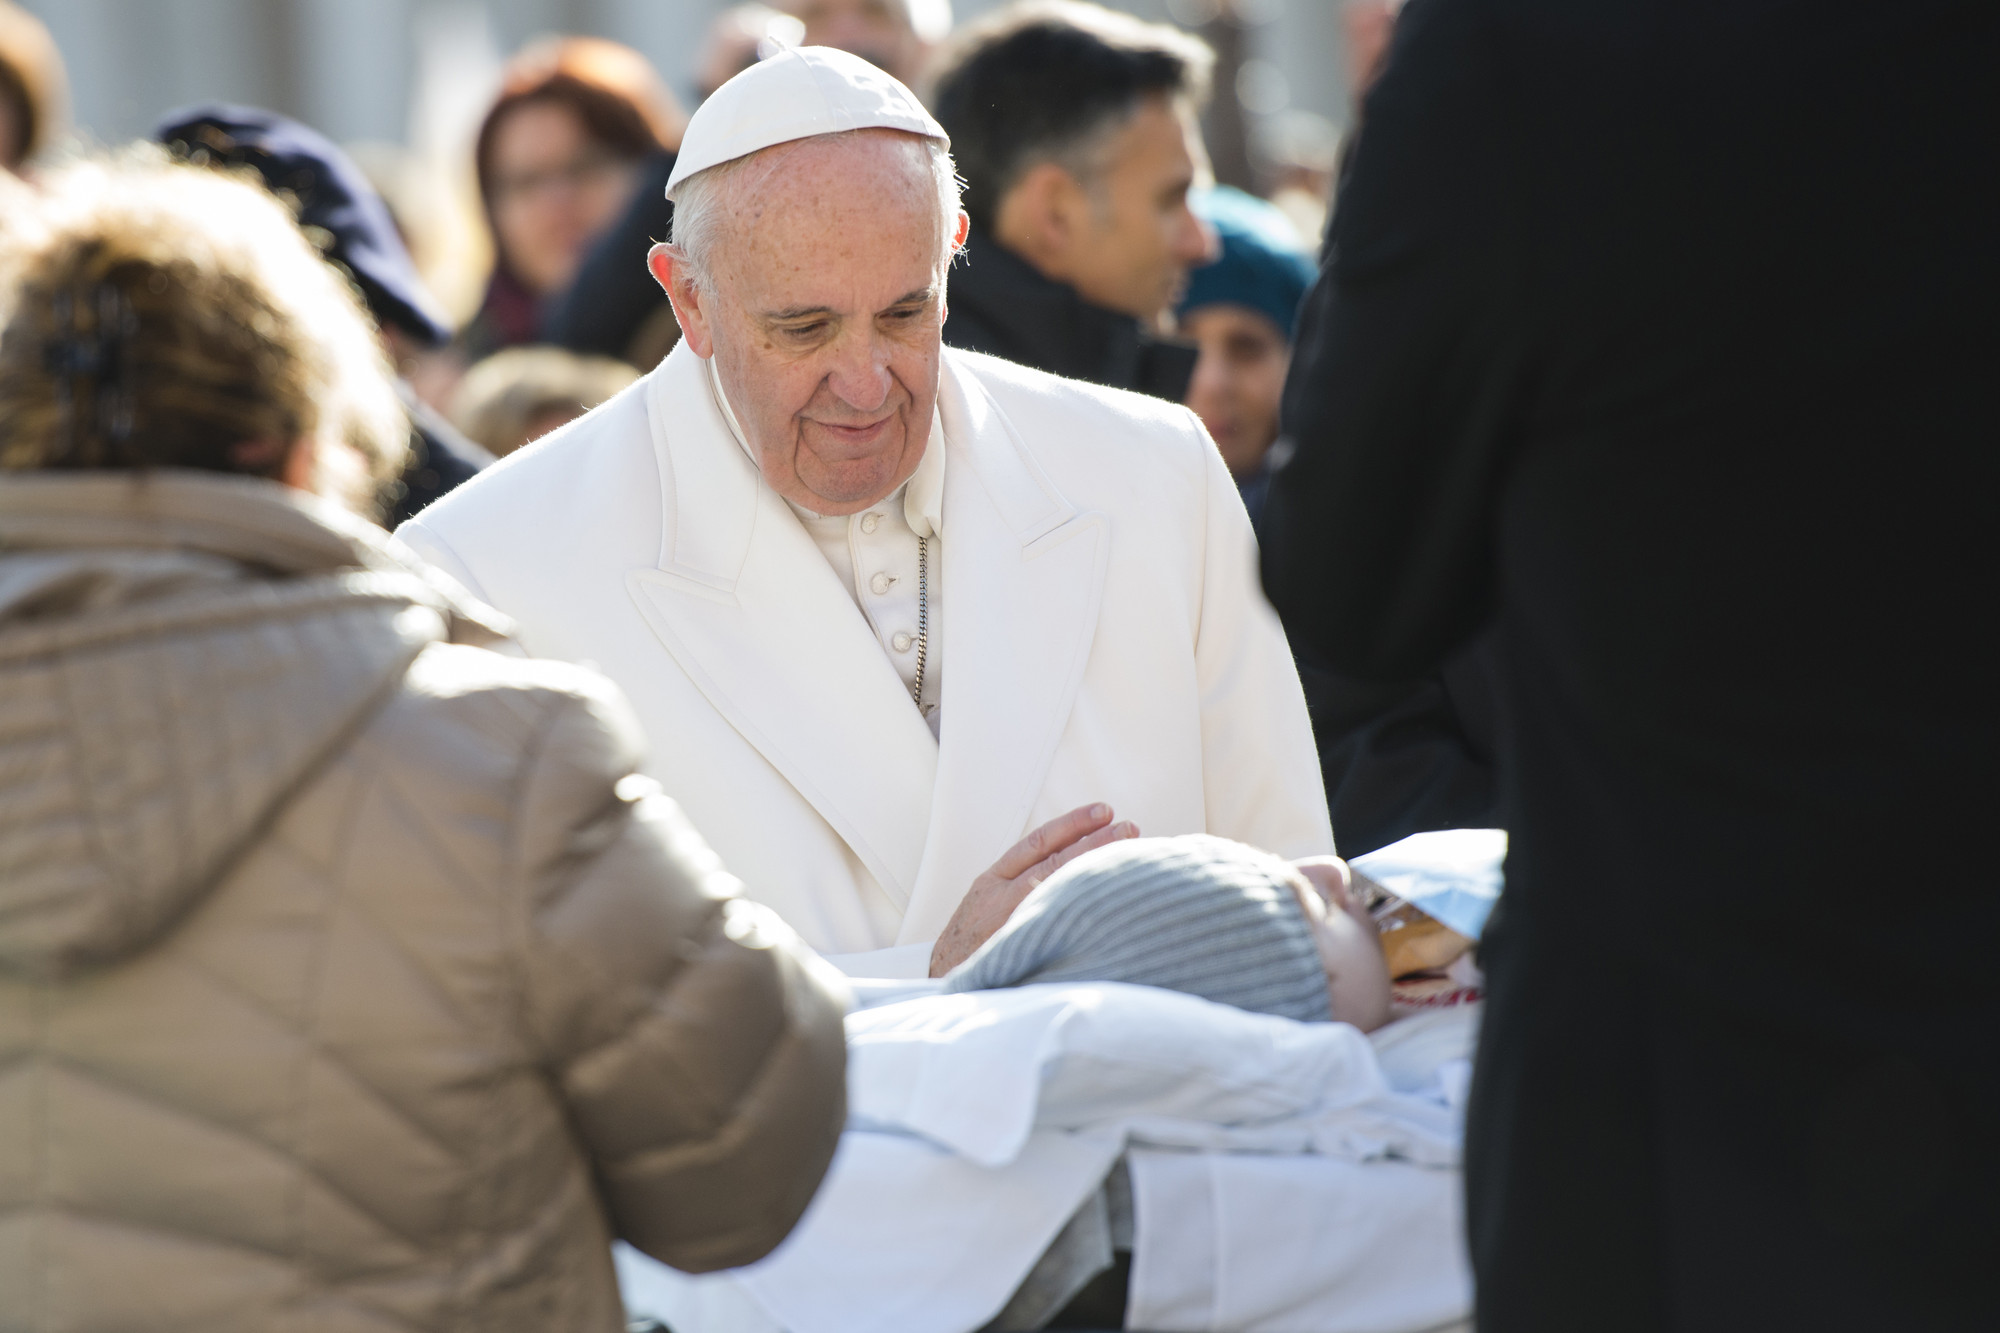 Pope Francis blesses a sick person lying on a bed